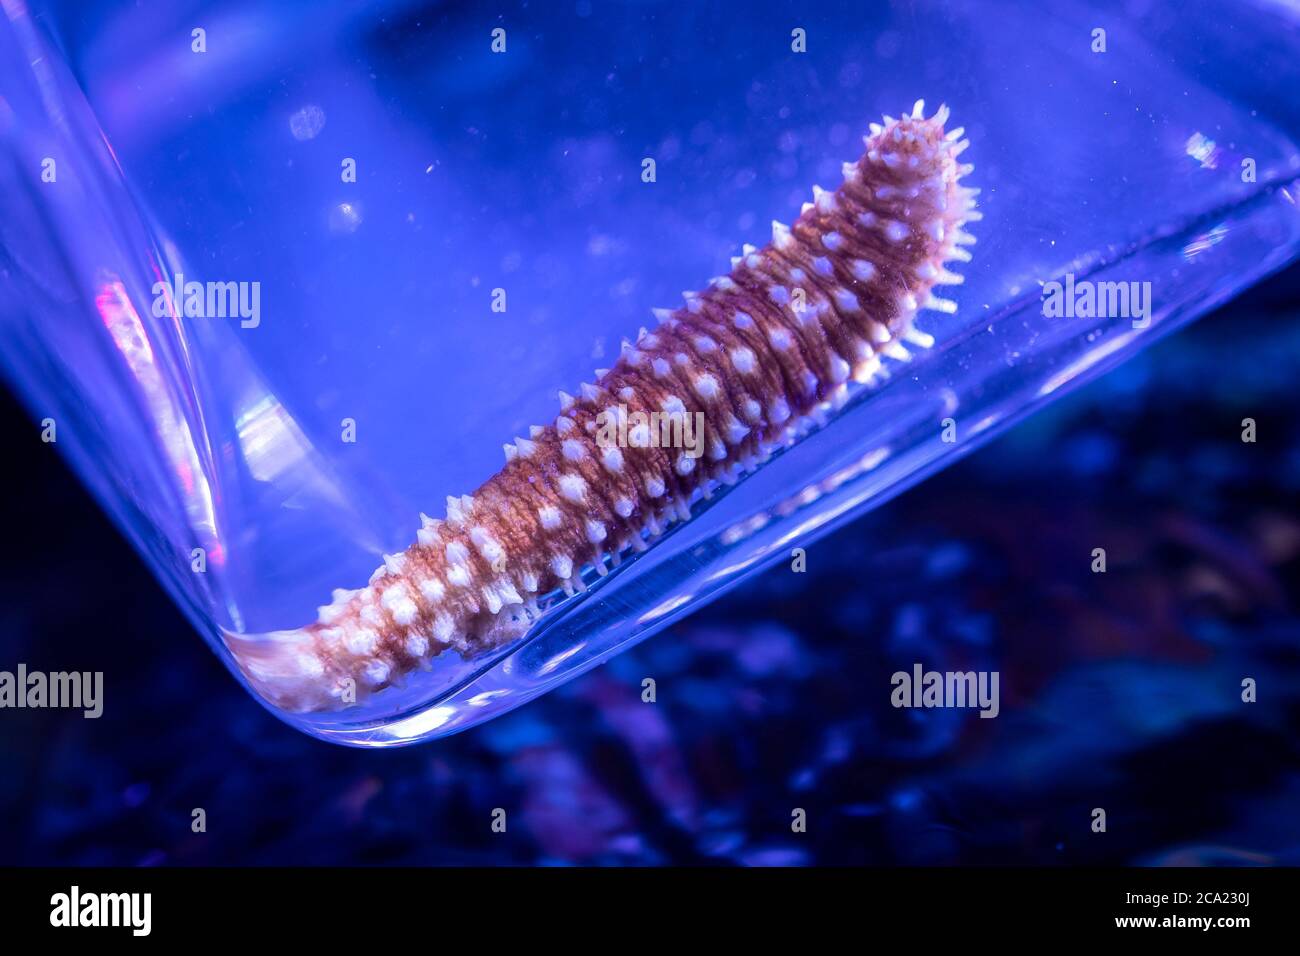 Oldenburg, Germany. 29th July, 2020. A sea cucumber of the genus Holothuria Hilla lies in a glass vessel. Sea cucumbers protect themselves with so-called saponins against the growth of algae or barnacles. Scientists at the University of Oldenburg studied sea cucumbers and substances that could help to produce environmentally friendly organic paints for antifouling coatings for ships. Credit: Sina Schuldt/dpa/Alamy Live News Stock Photo